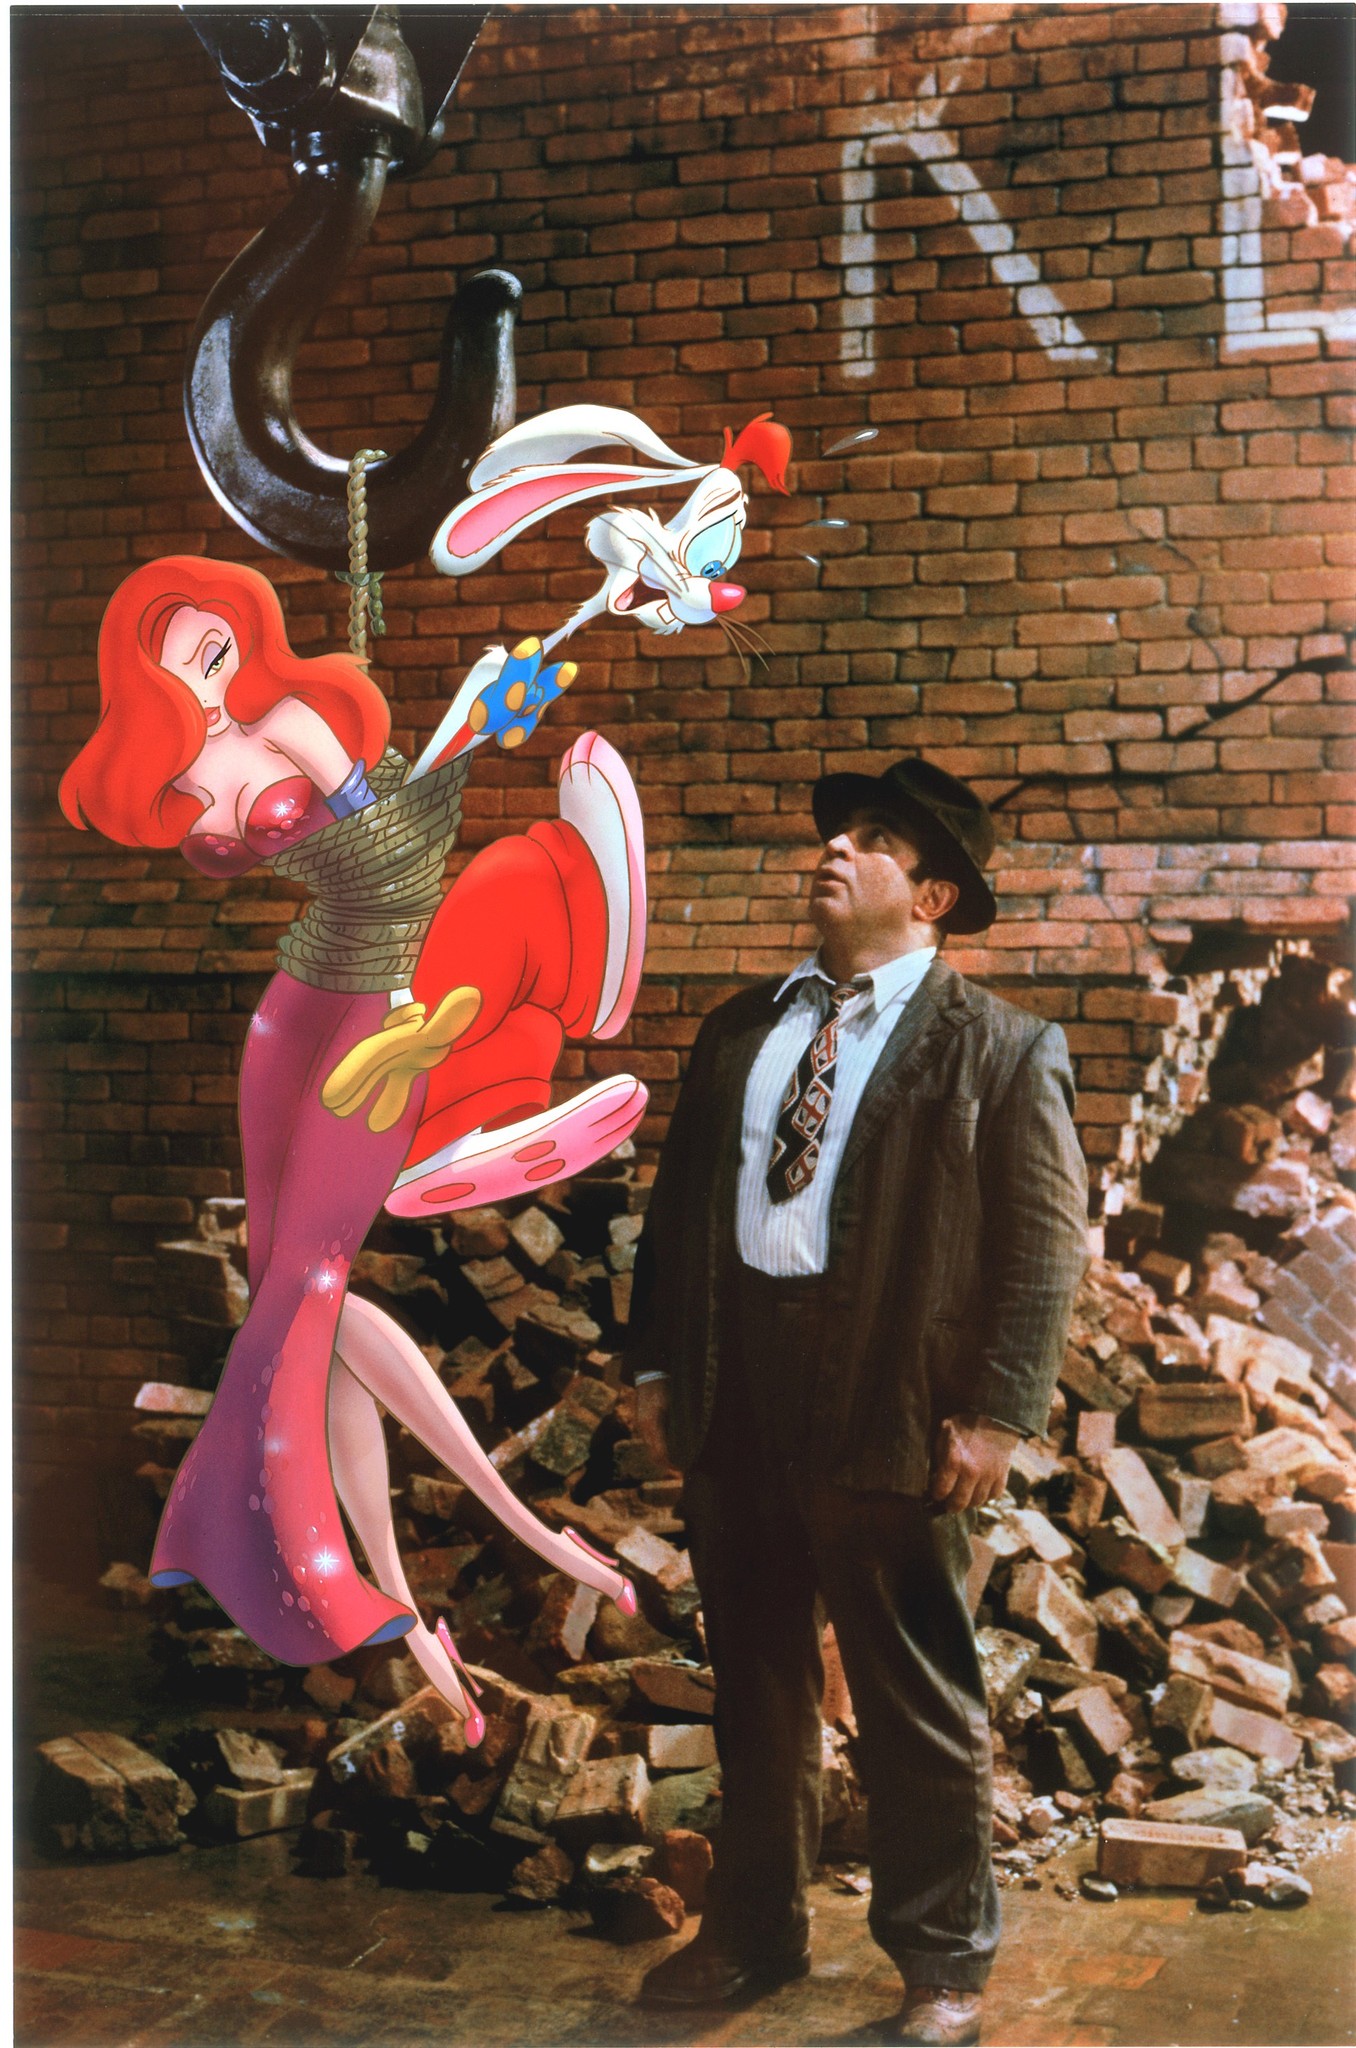 amr shitos share pictures of jessica rabbit and roger rabbit photos